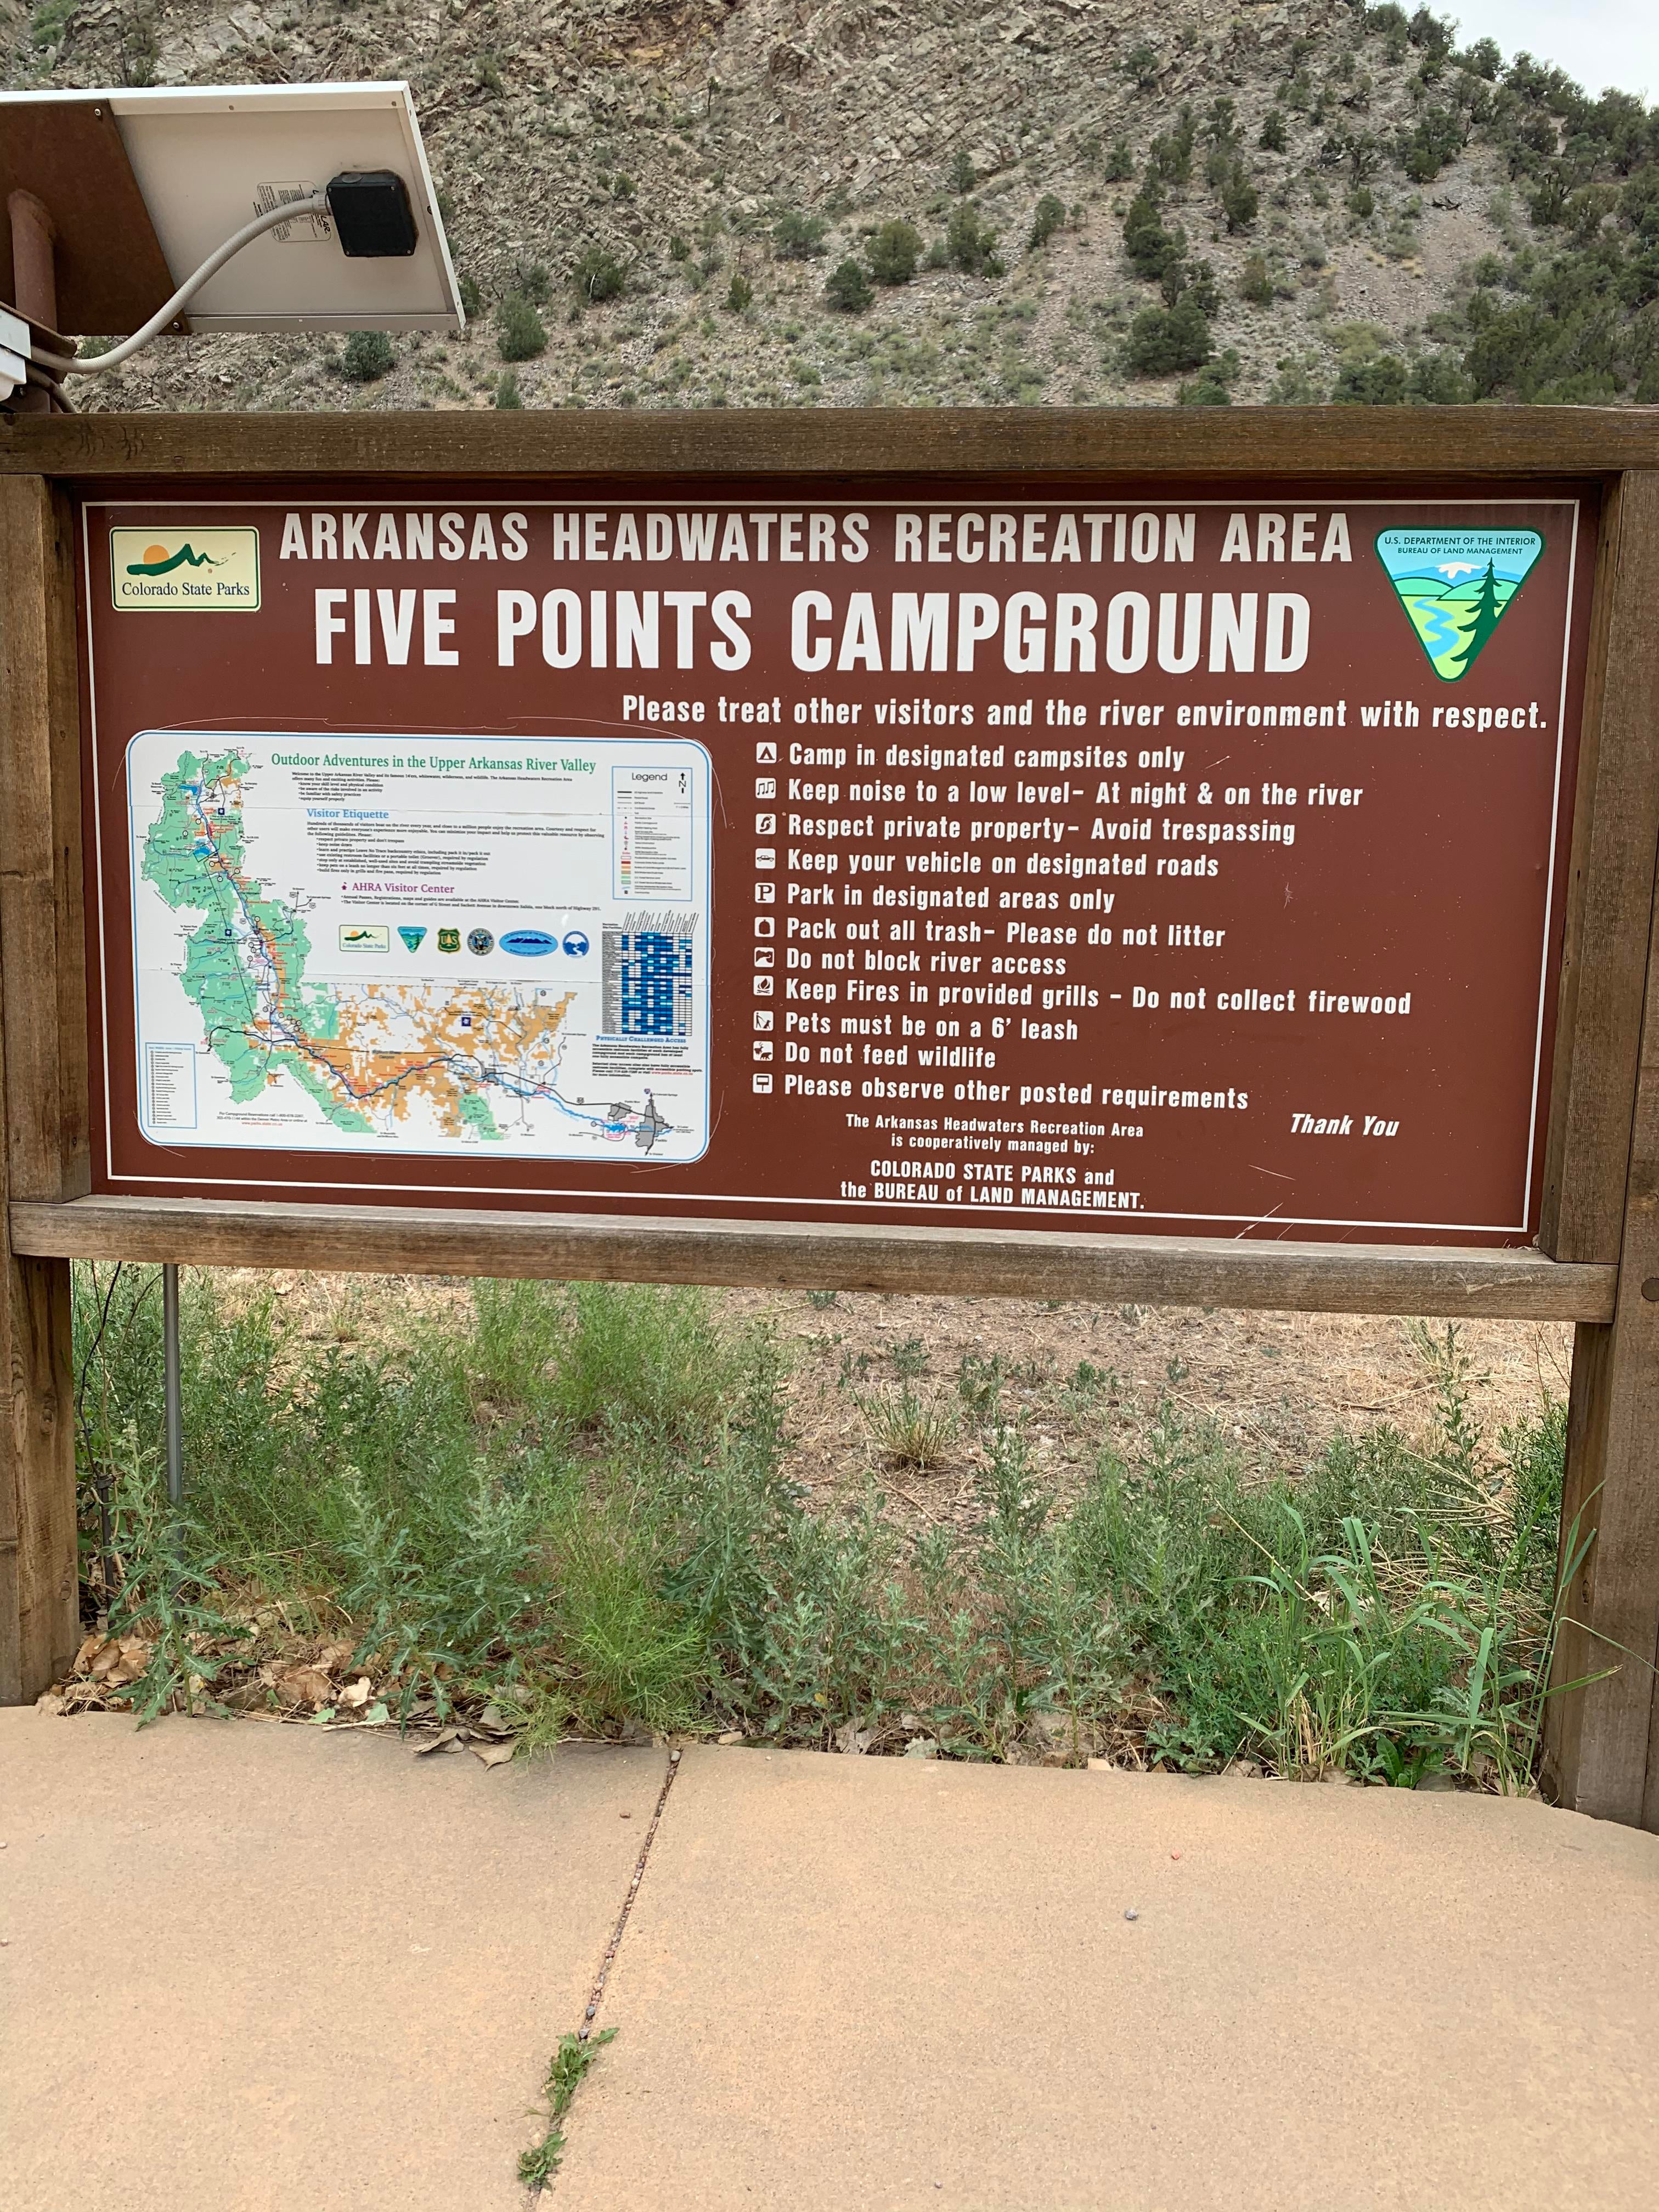 Camper submitted image from Five Points Campground — Arkansas Headwaters Recreation Area - 1